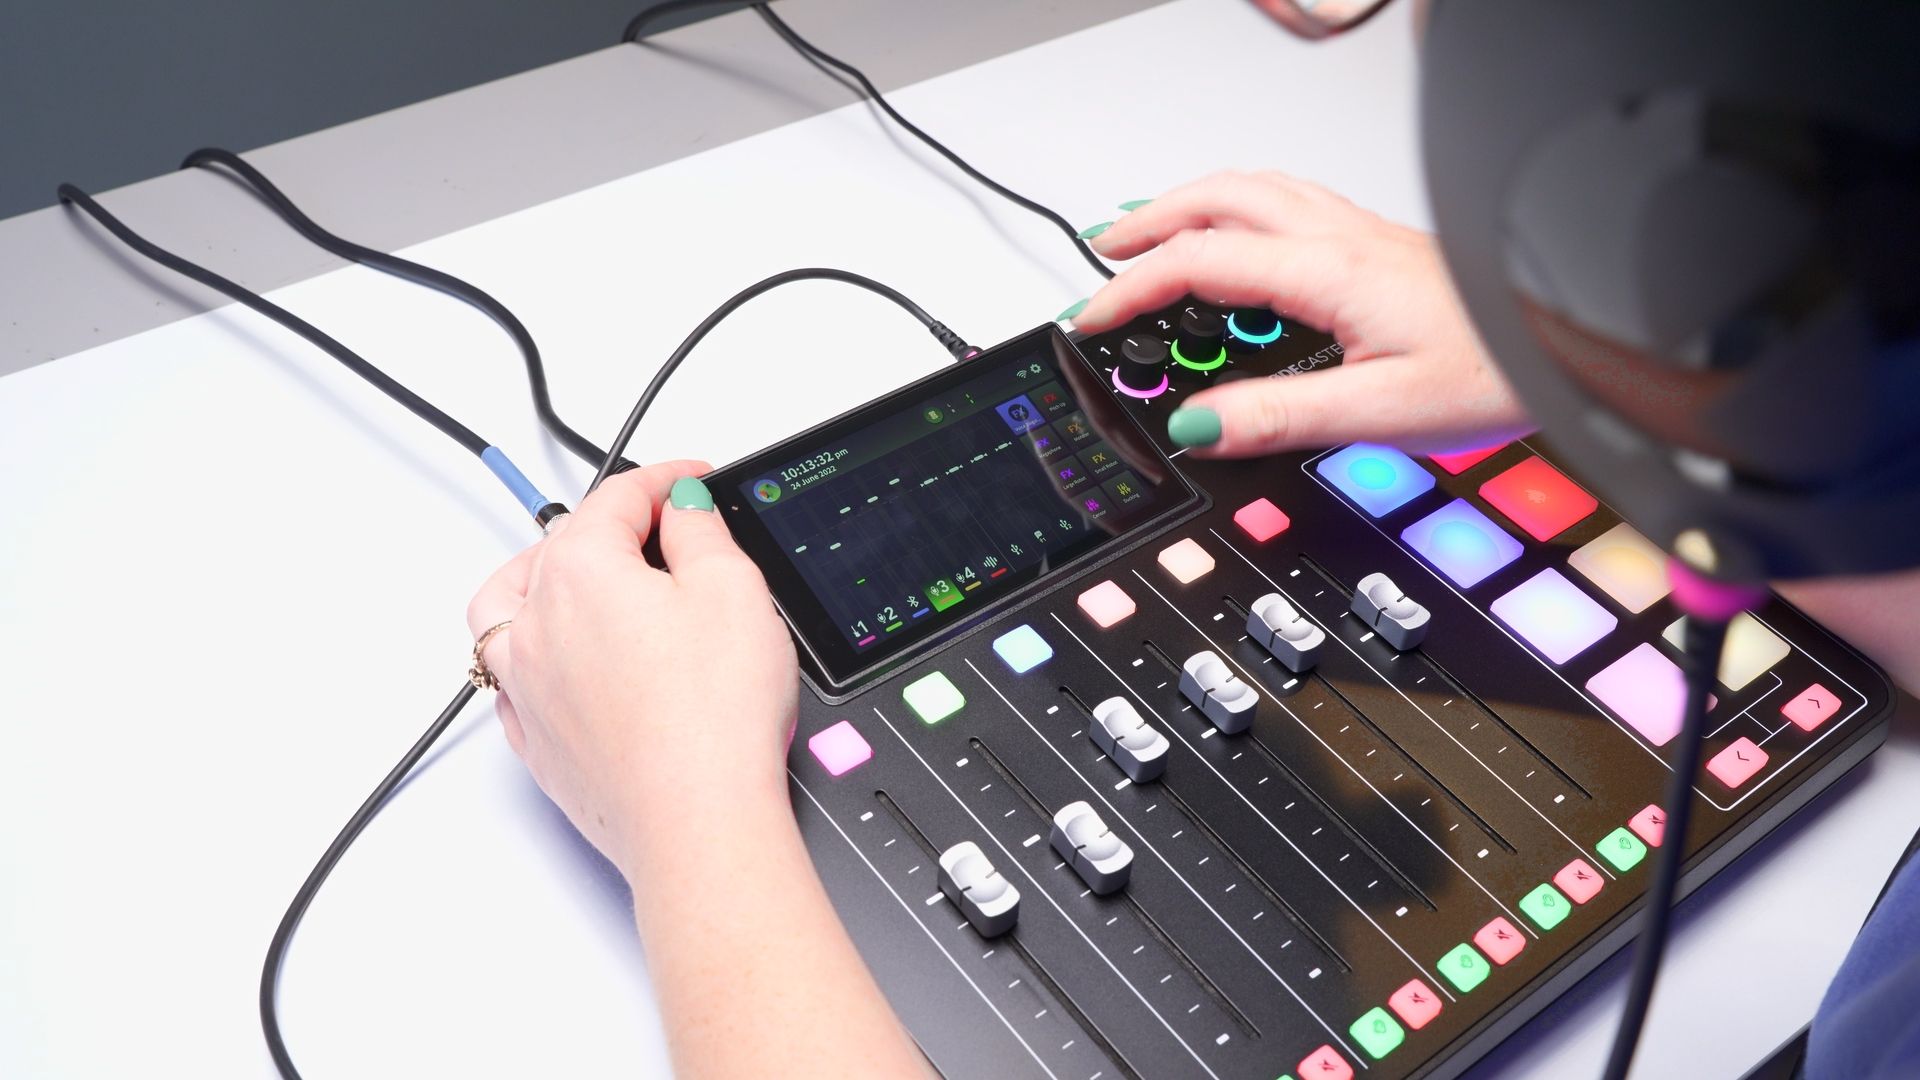 Rodecaster Pro II Review: A Jack of All Trades Podcasting Device